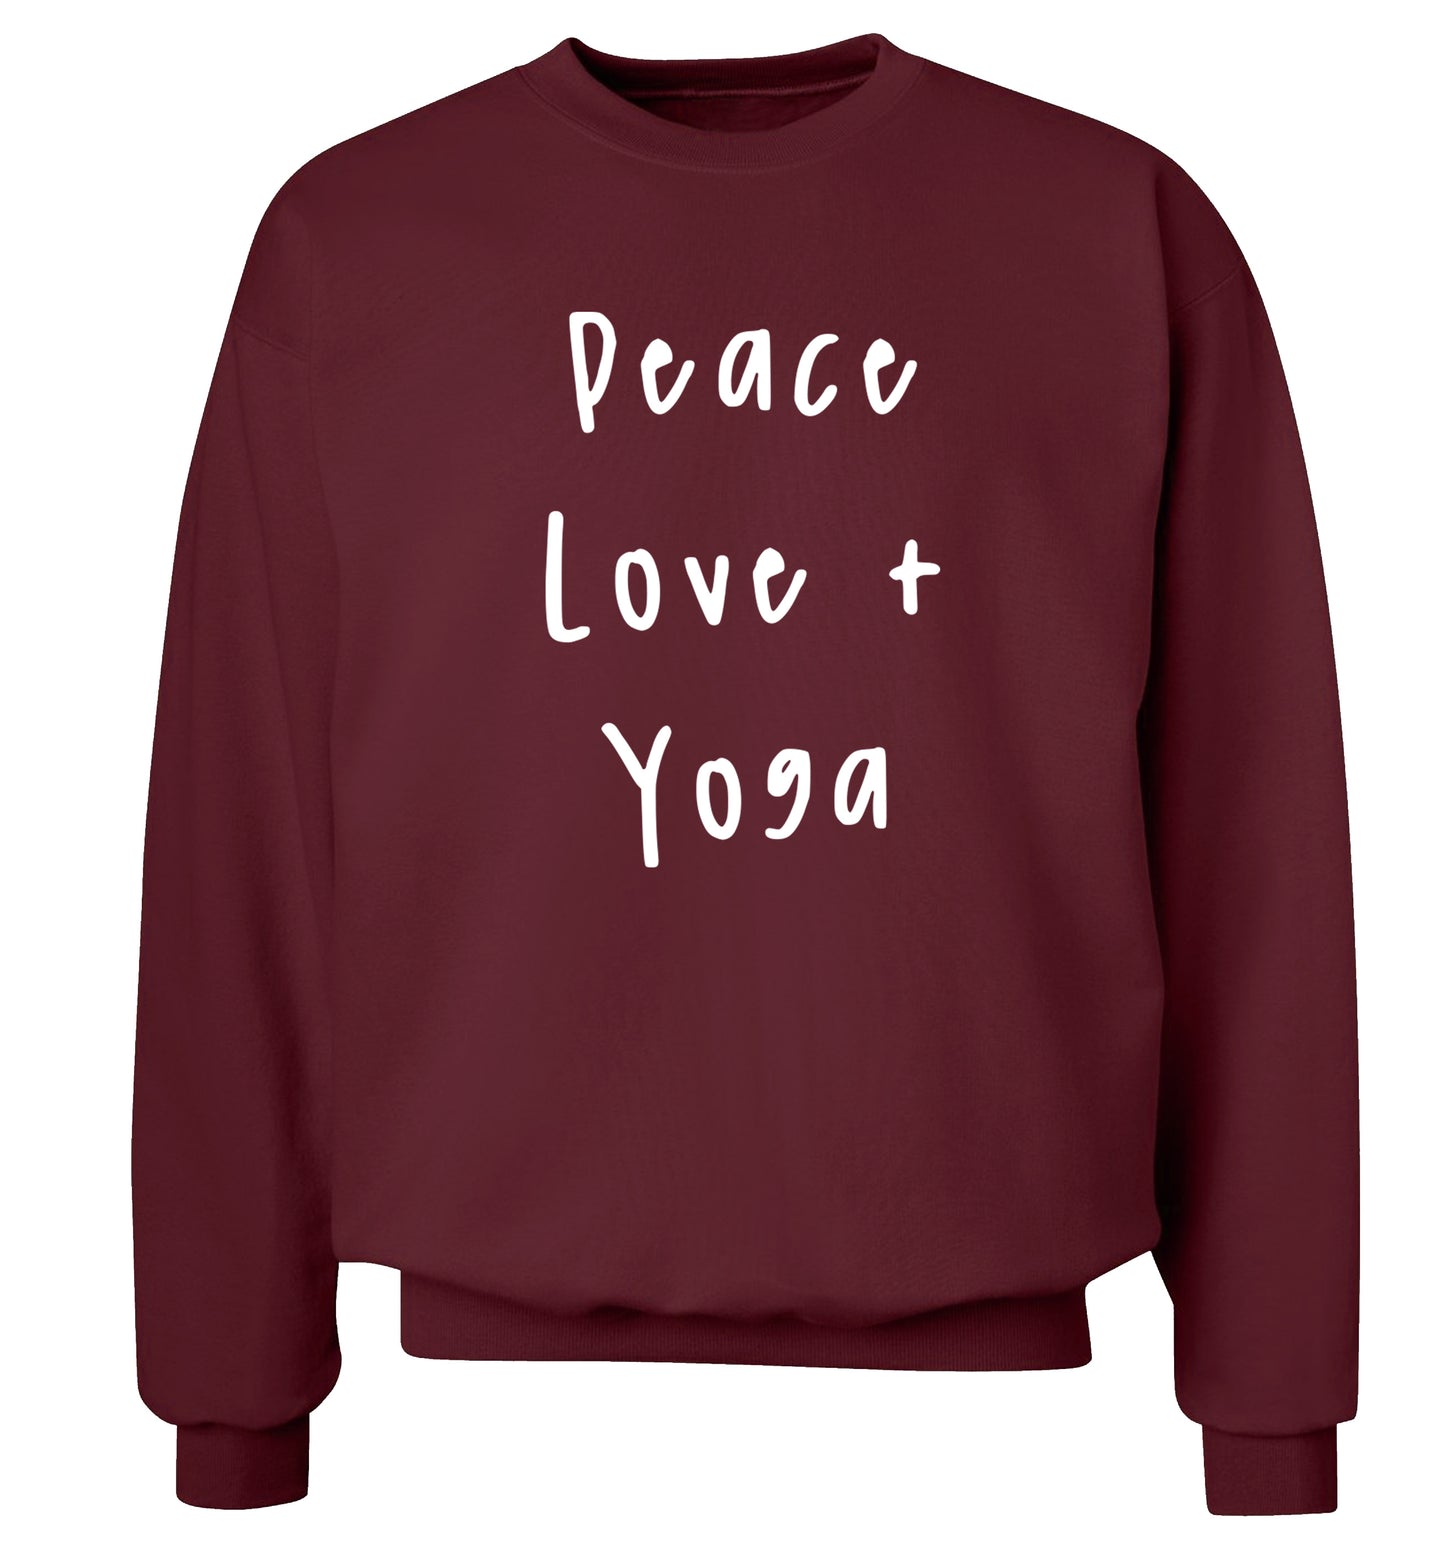 Peace love and yoga Adult's unisex maroon Sweater 2XL